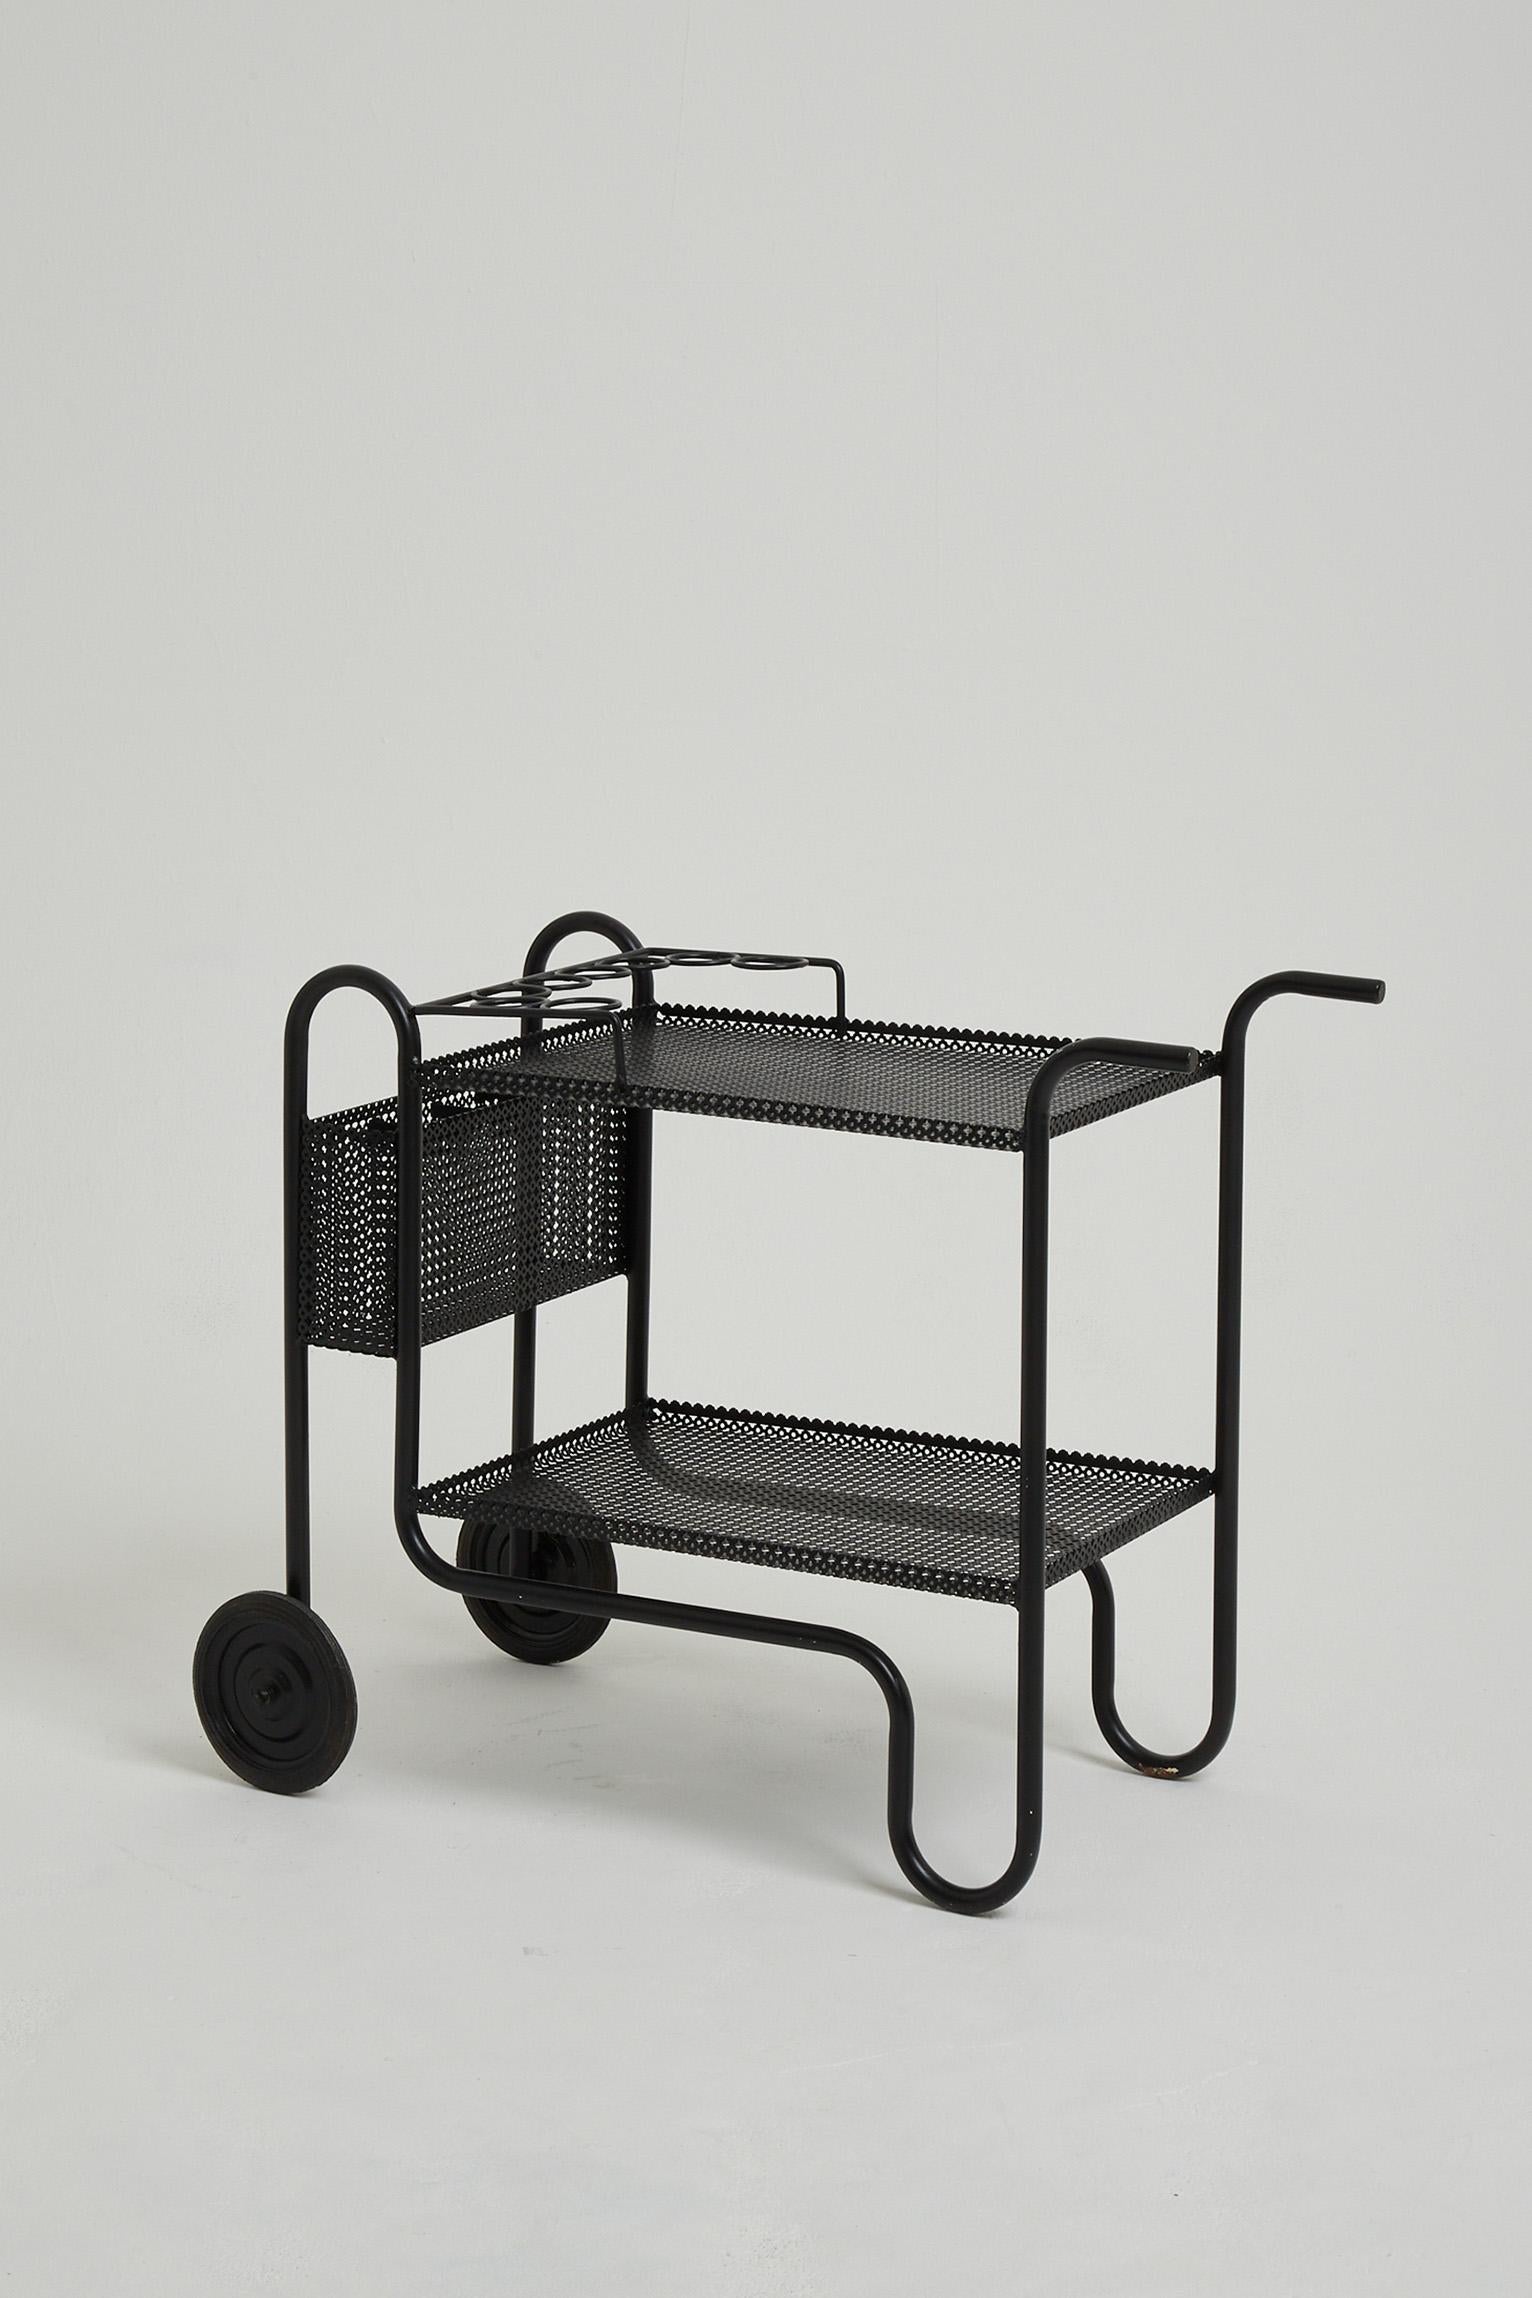 A black enamelled iron and rigitule drinks trolley, attributed to Mathieu Matégot (1910-2001).
France, Circa 1955.